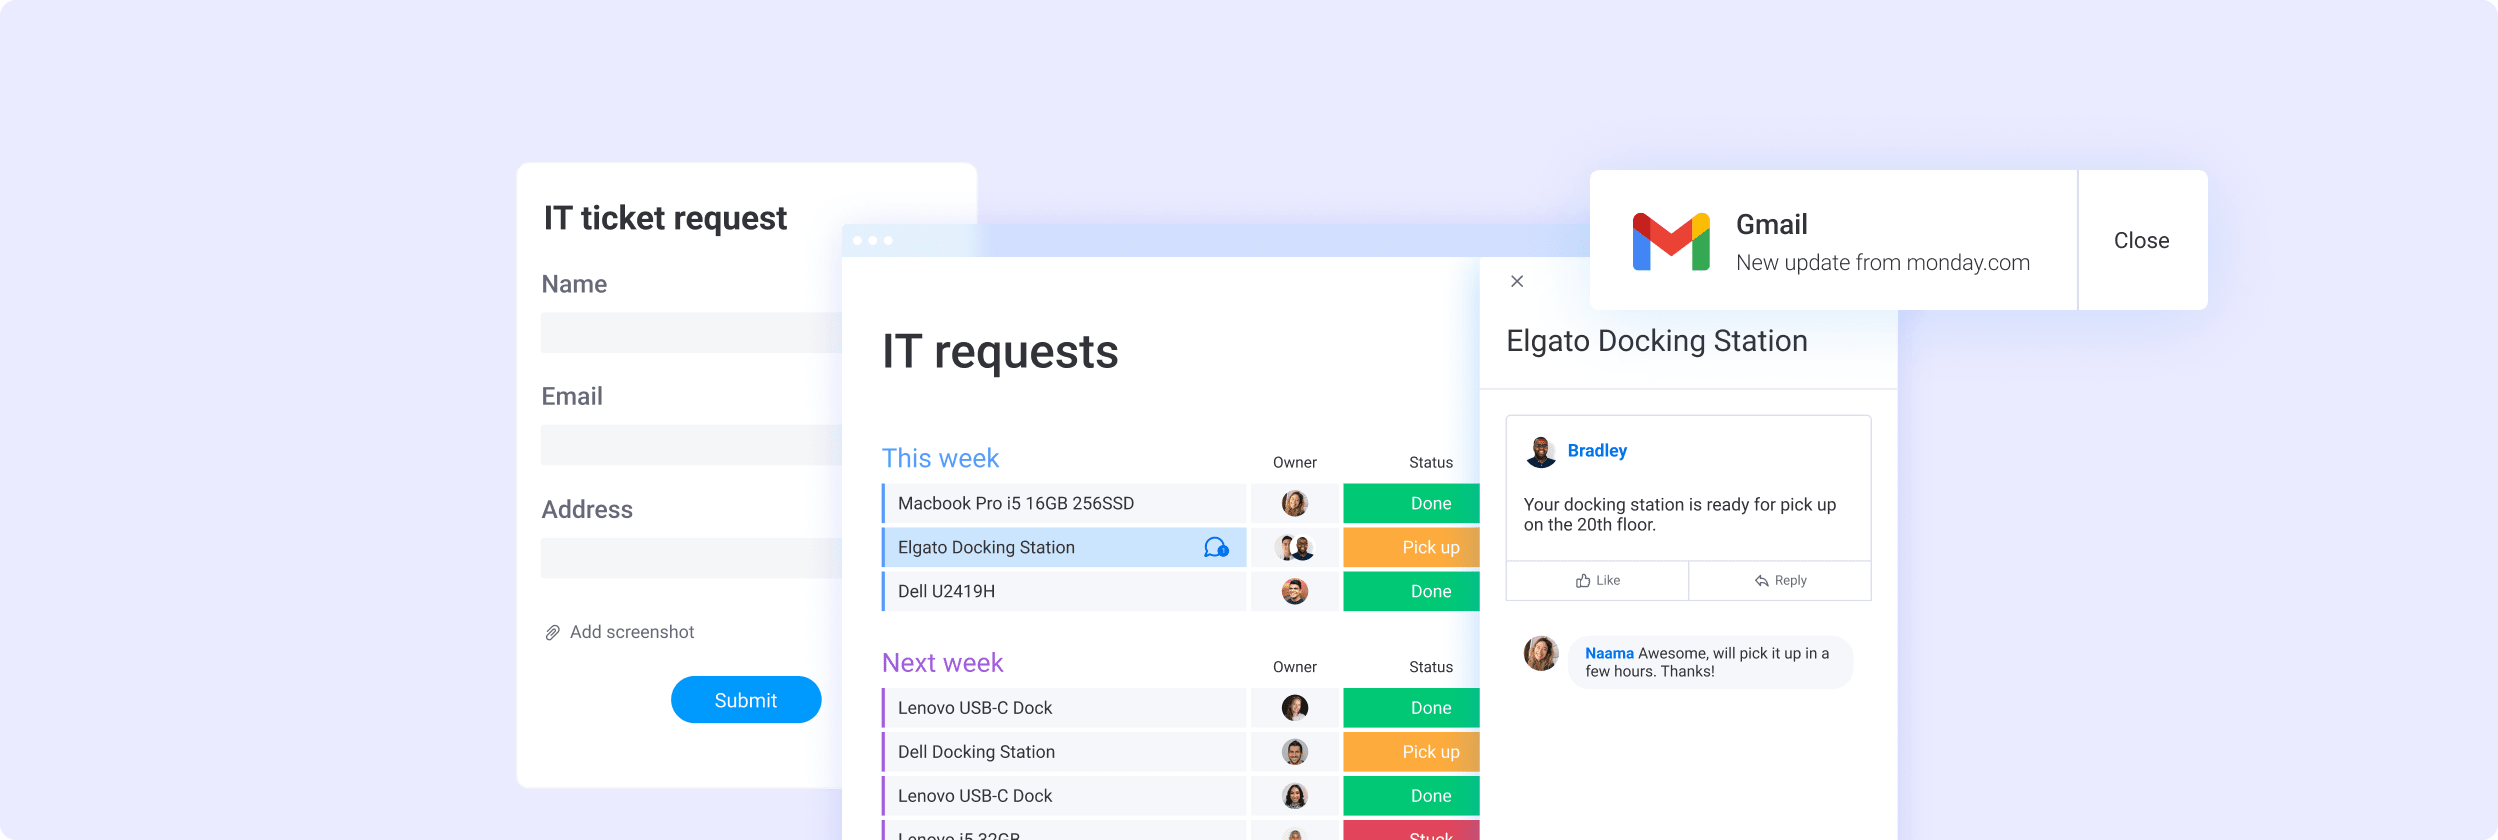 IT requests board with a request update and an IT ticket request form